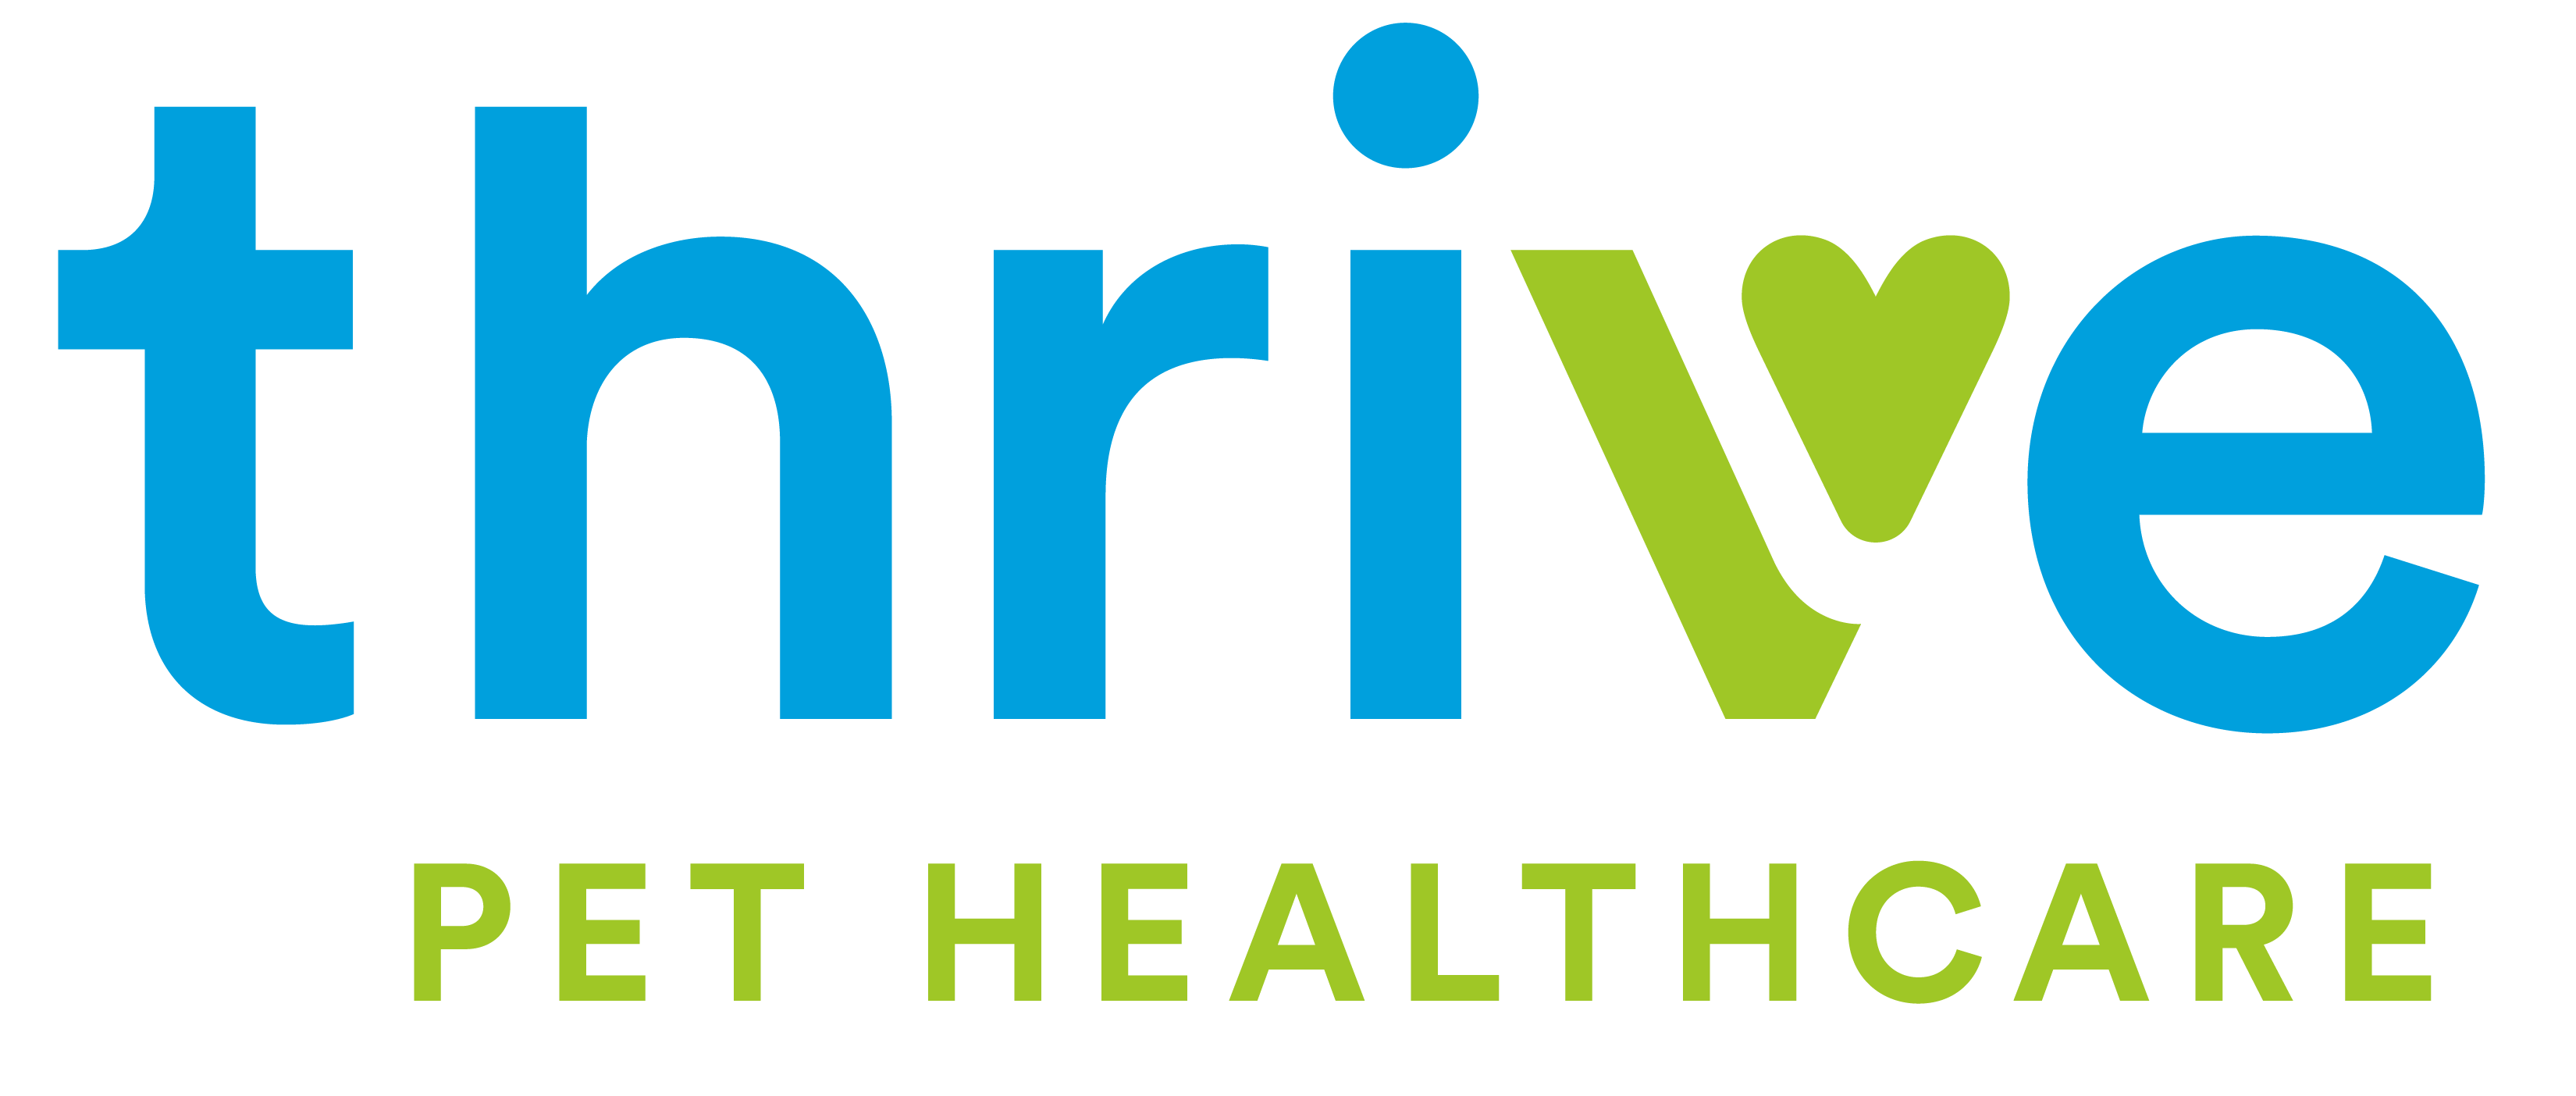 Thrive Affordable Vet Care